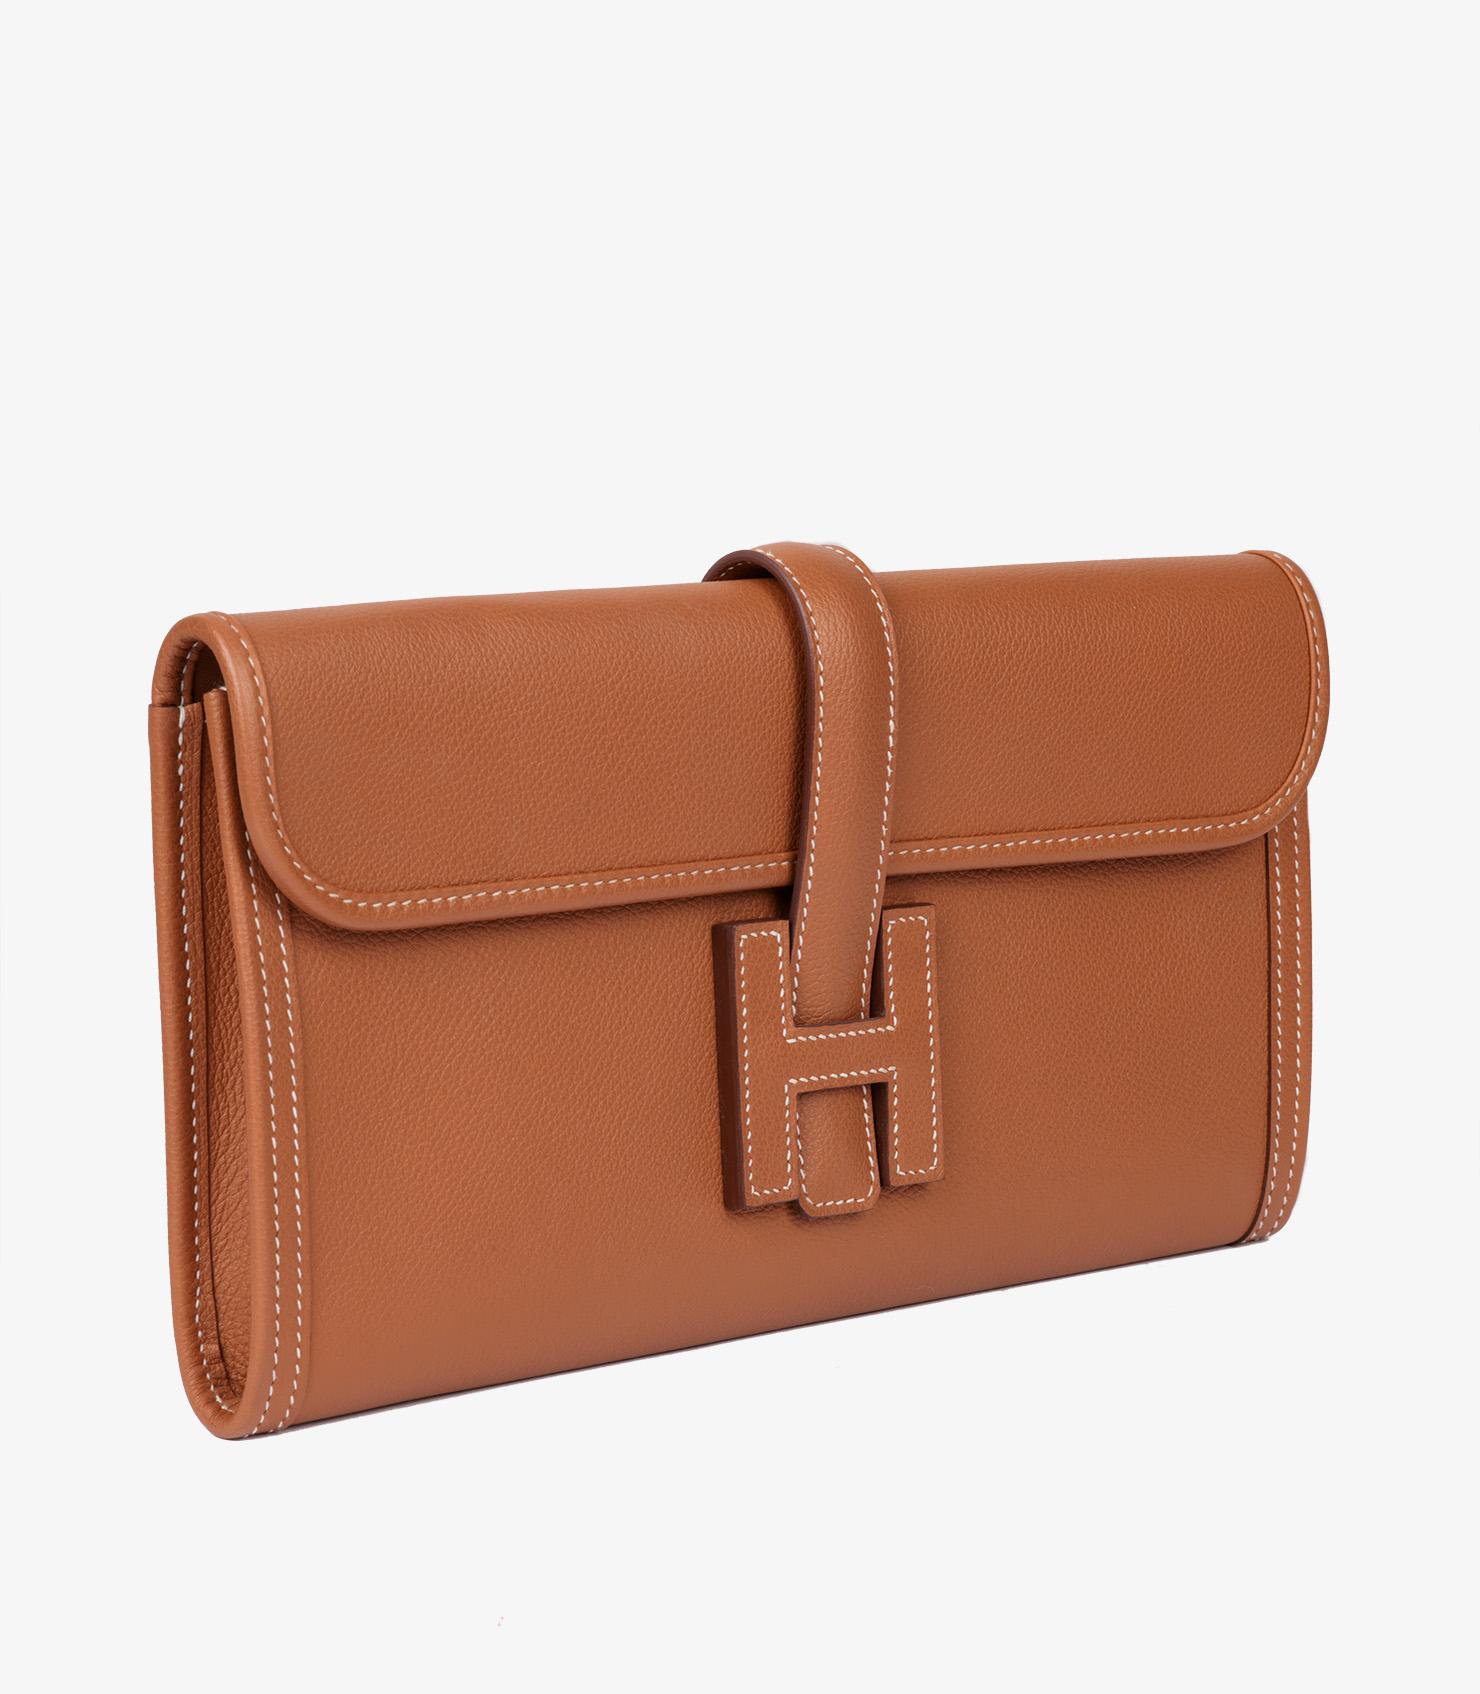 Hermès Gold Epsom Leather Jige Elan 29

Model- Jige Elan 29
Product Type- Clutch
Serial Number- *
Age- Circa 2020
Accompanied By- Hermès Dust Bag, Box, Protective Felt, Care Booklet, Ribbon
Colour- Gold
Material(s)- Epsom Leather
Authenticity